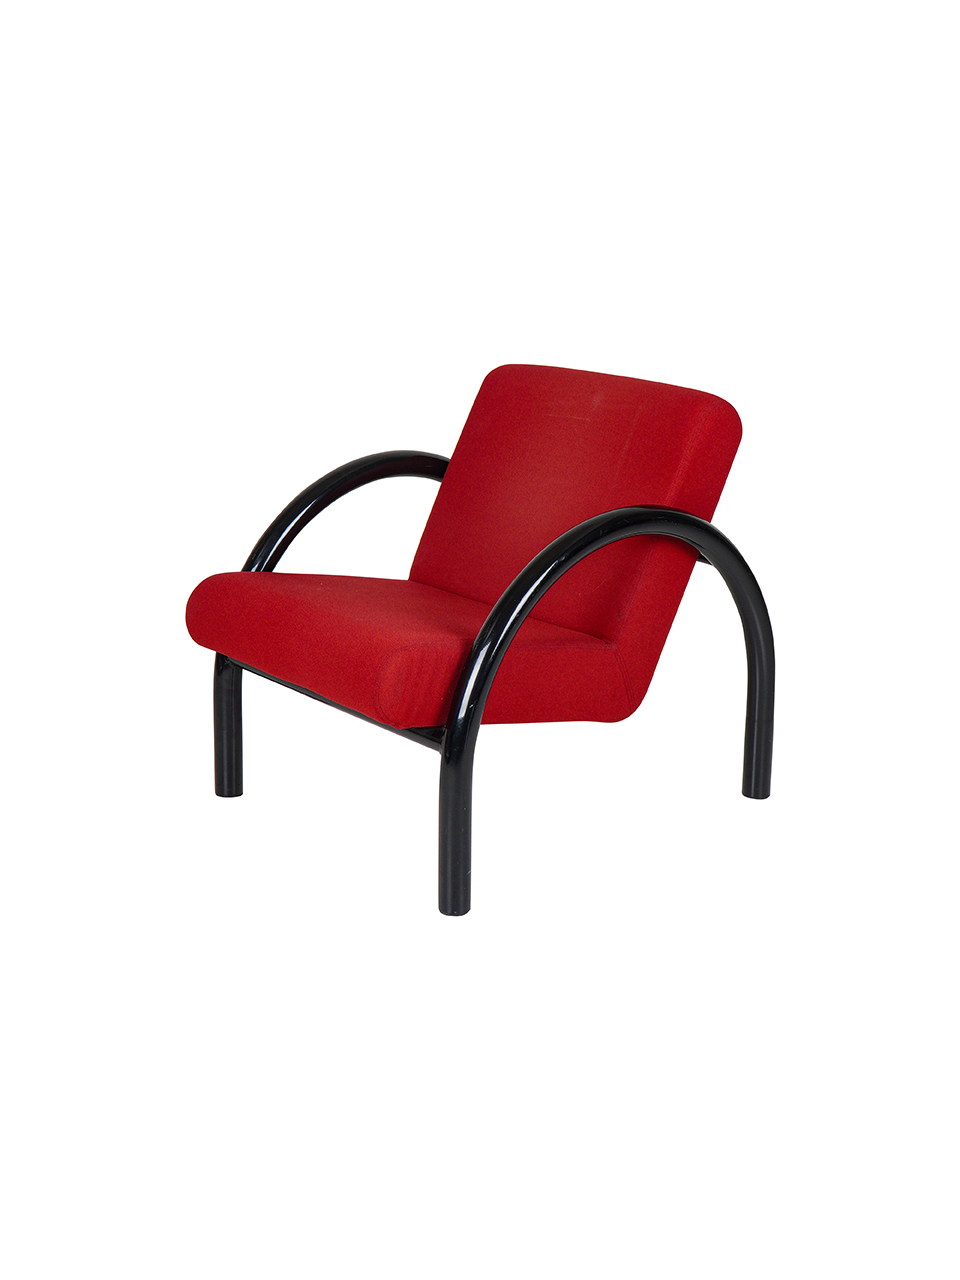 [Exsta] Lounge Chairs